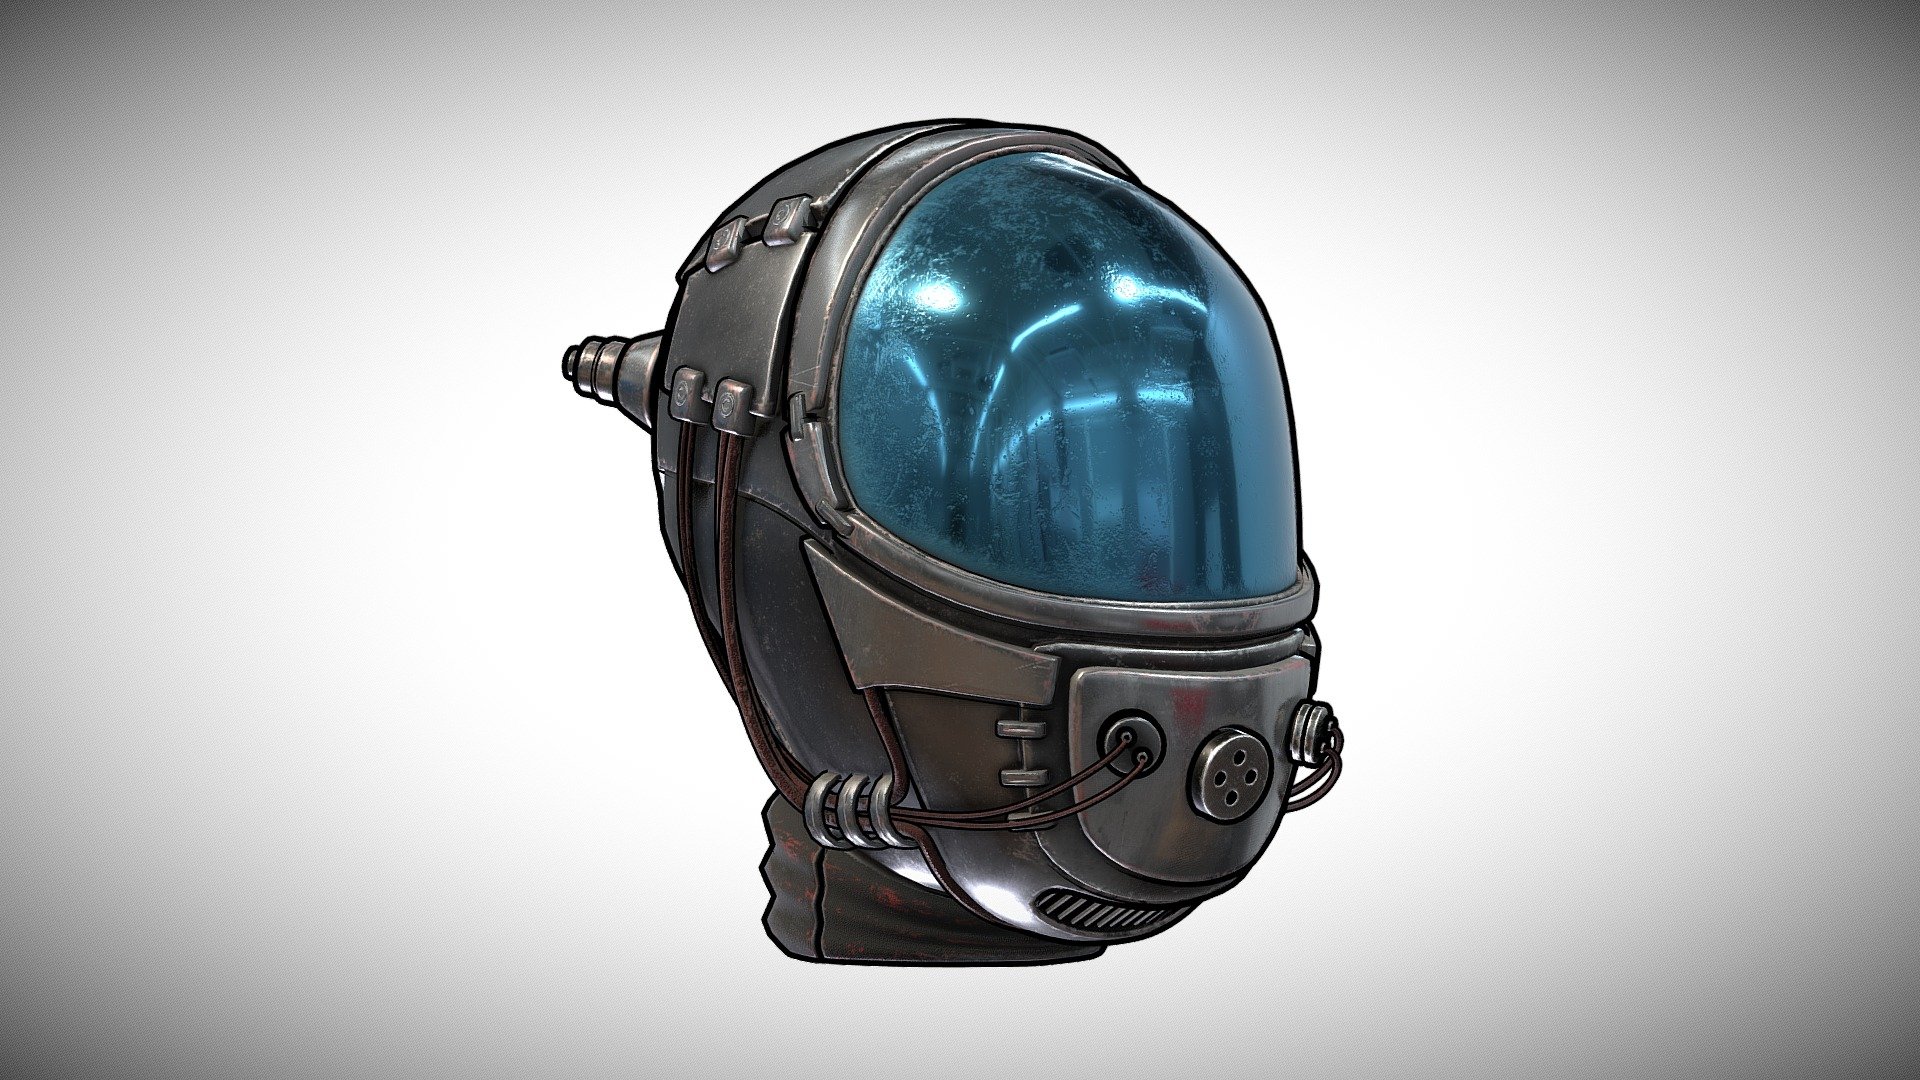 Science-fictional space mask model.
UV Unwrapped and textured. 
Comes with textures at 1k, 2k &amp; 4k resolution. 
PBR &amp; Toon (LBS) Shader variations.

The model contains 5 objects, 1 sets of material (+1 Outline for Toon), and 1 set of textures. 
Modeled in Blender, painted in Substance Painter. 
.
.
.
.
.
.
More: 
https://linktr.ee/ed3d - Helmet - Space Mask T2 - Buy Royalty Free 3D model by Ed (@Ed3D.Blend) 3d model